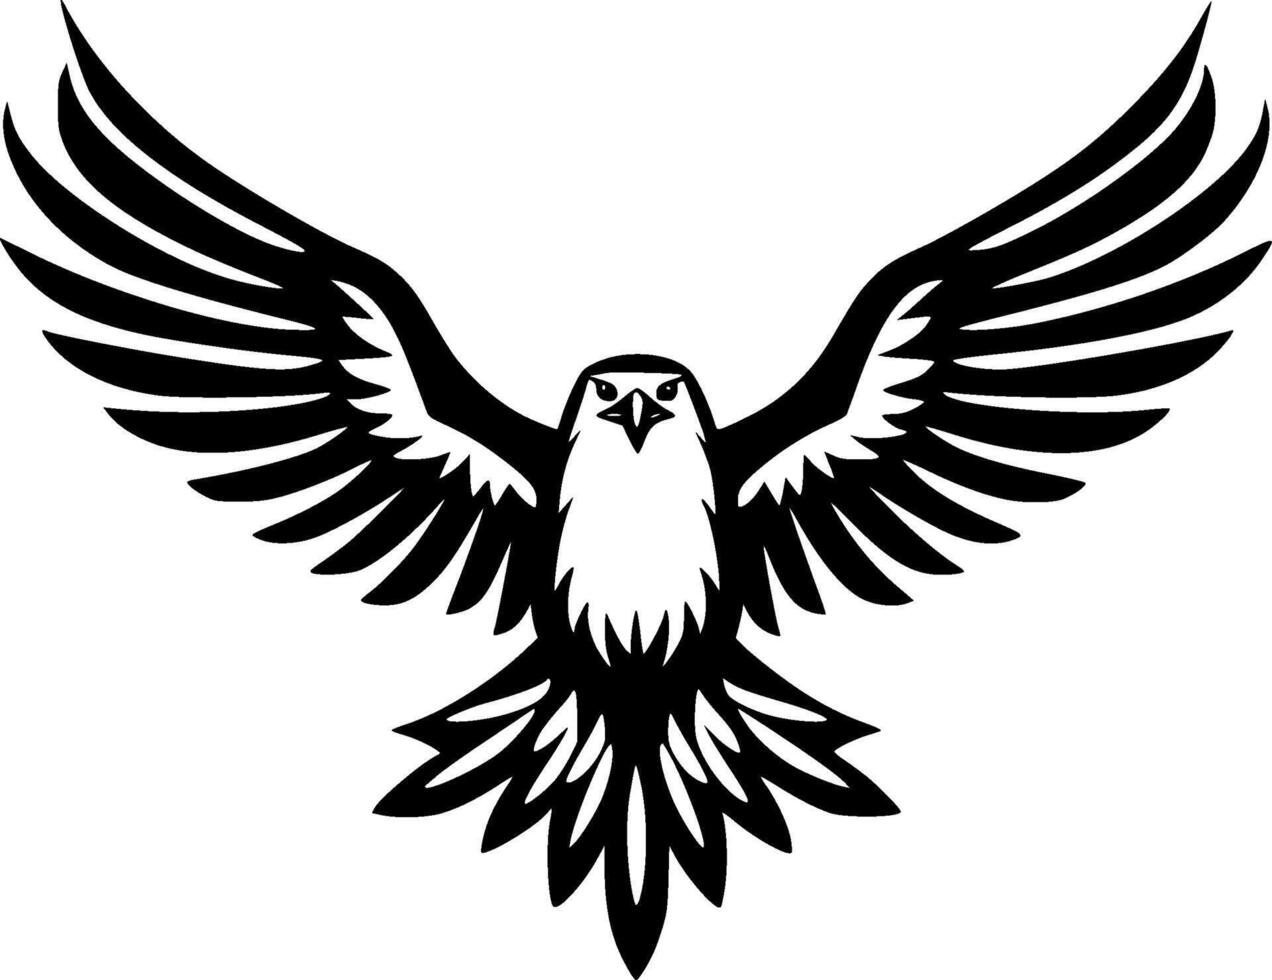 Eagle - Black and White Isolated Icon - illustration vector